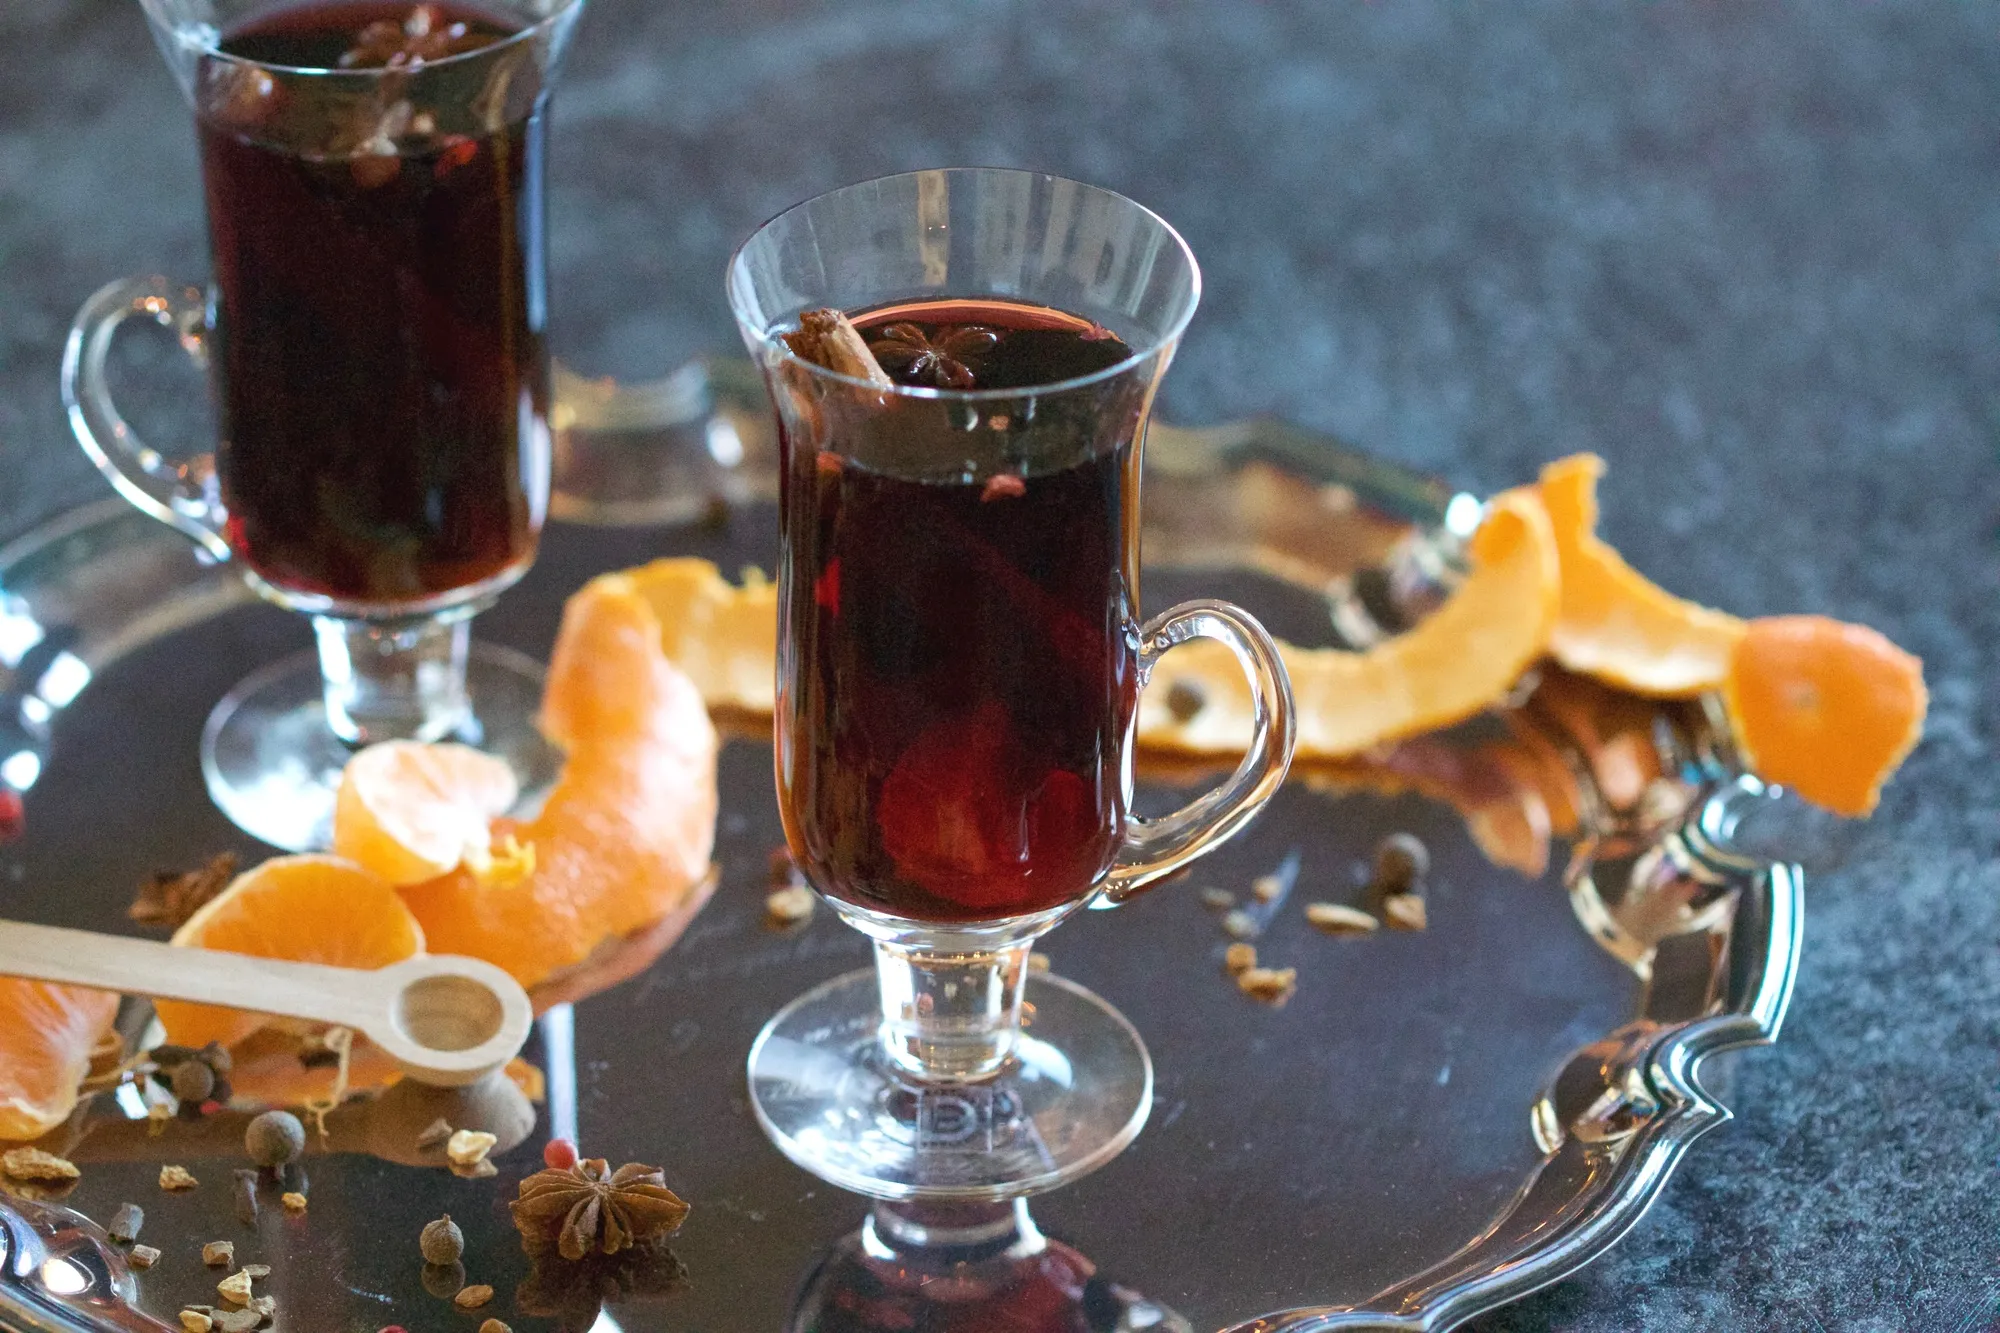 Glass mugs filled with mulled wine. The mugs are on a serving tray, and surrounded by orange peel and pieces of star anise and coriander seed.